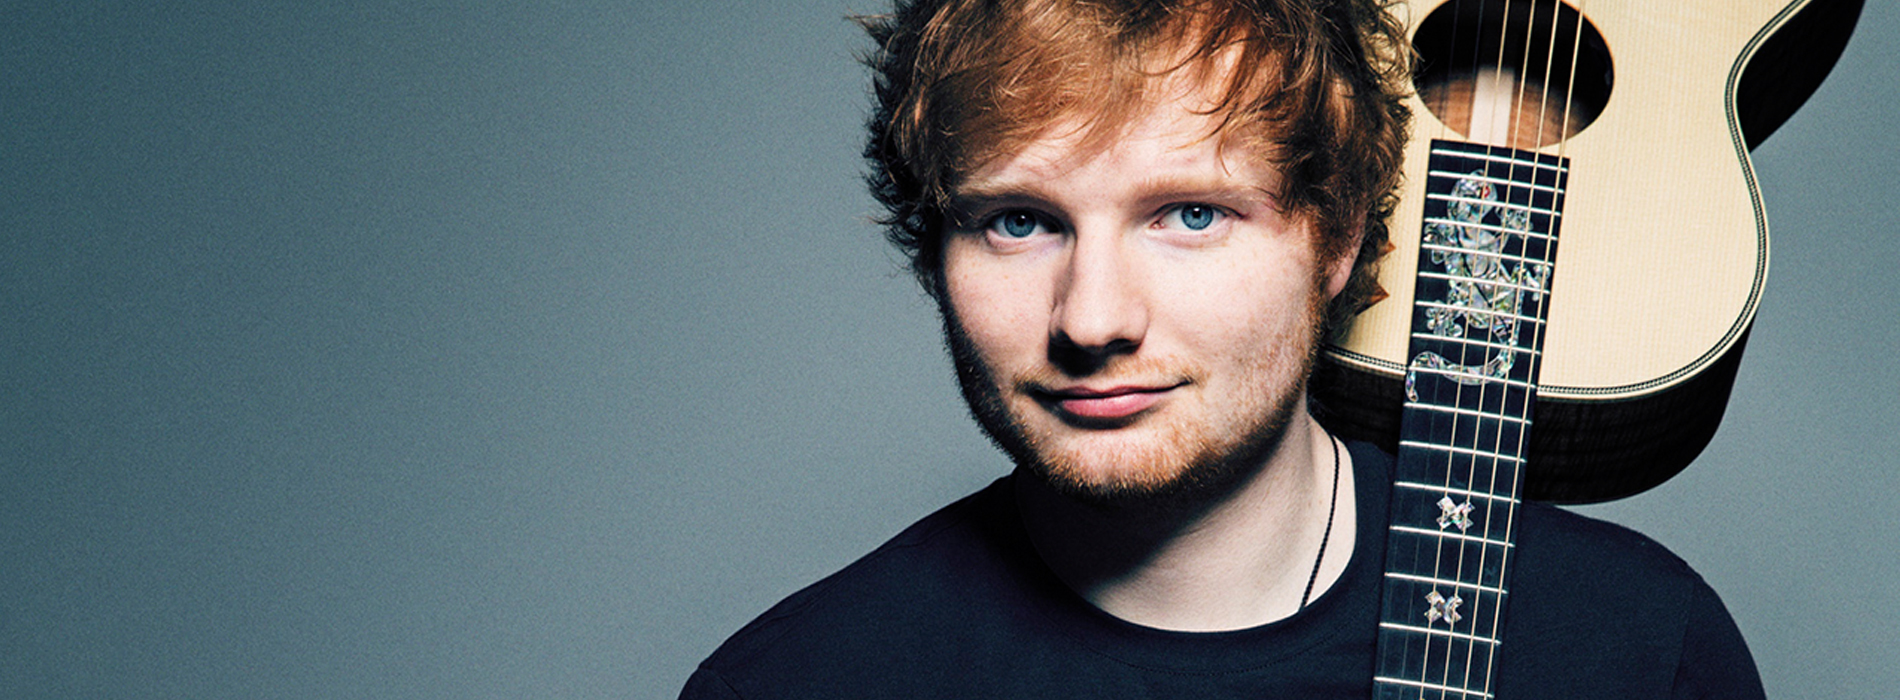 Amazing Ed Sheeran Pictures & Backgrounds